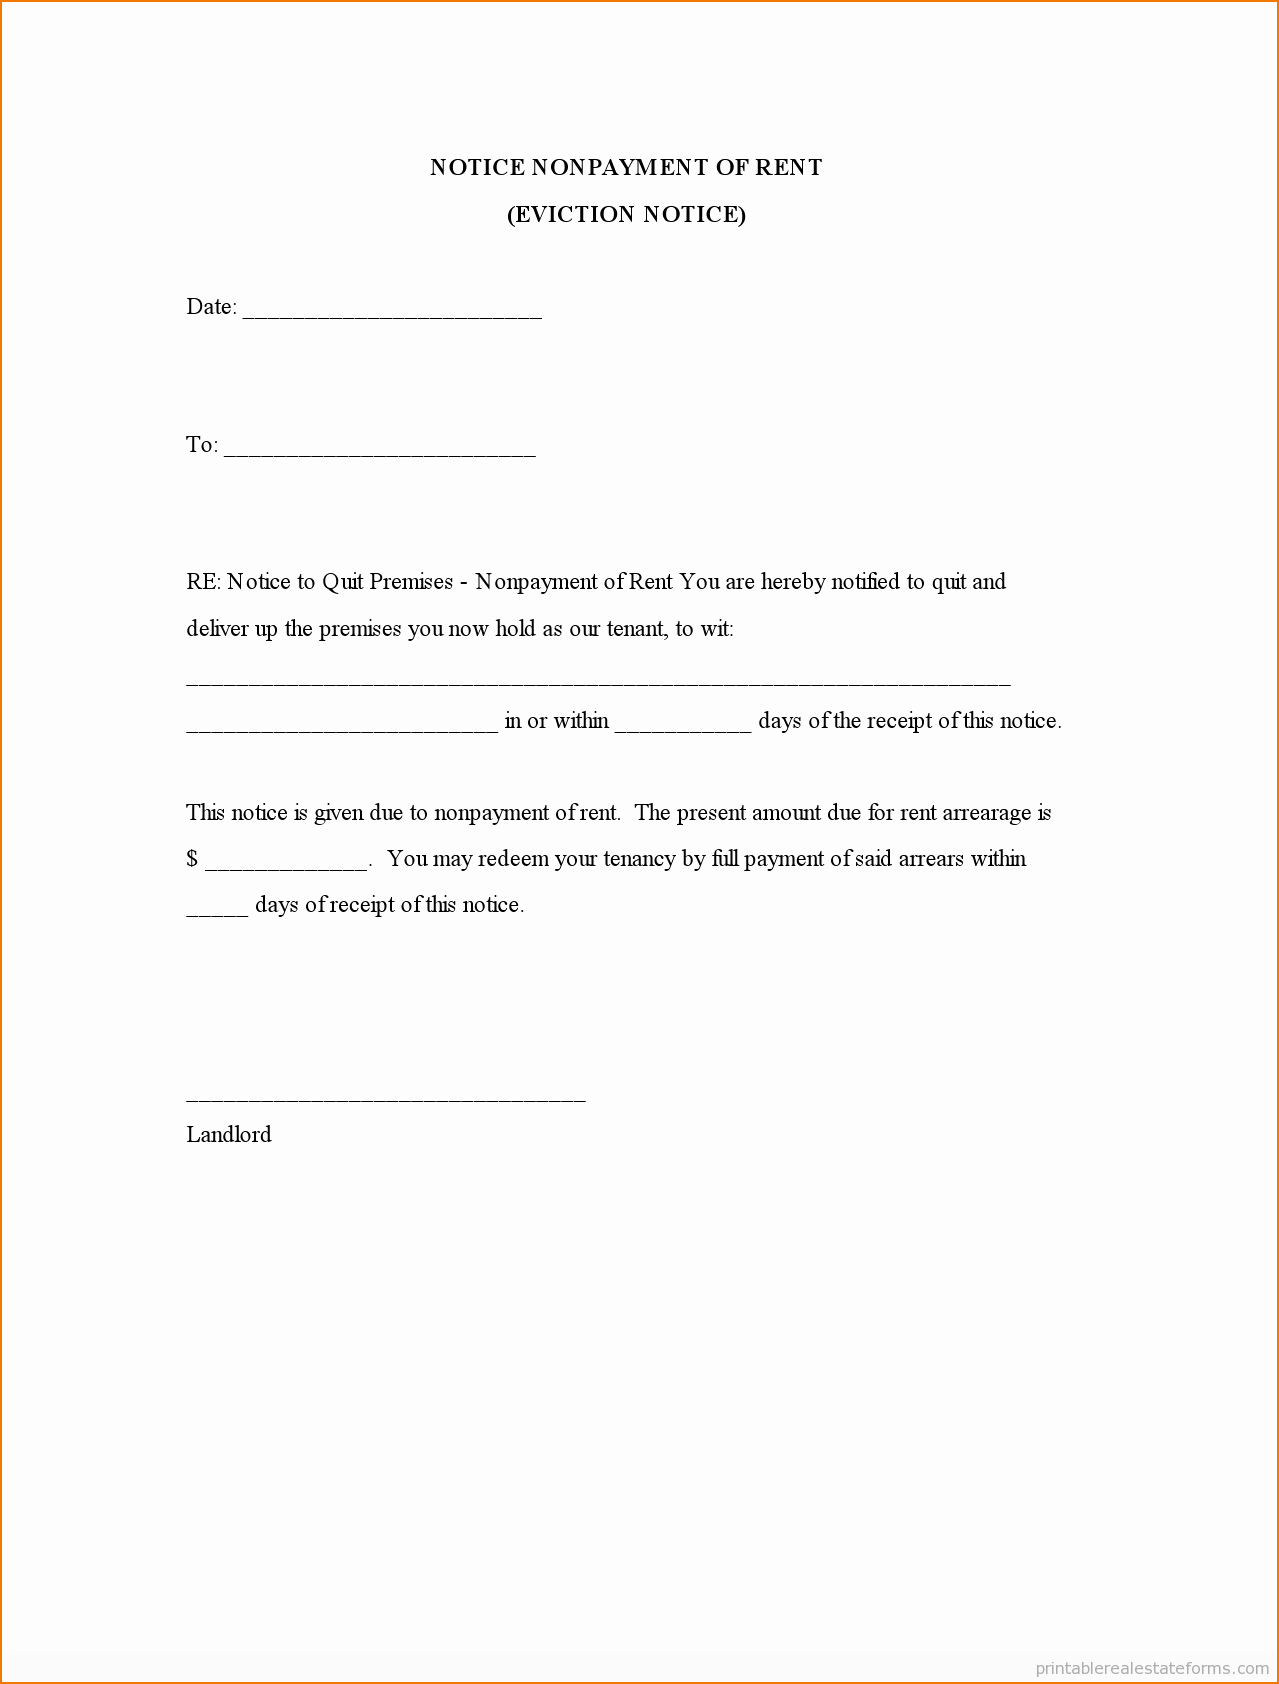 4 Free Printable Eviction Notice